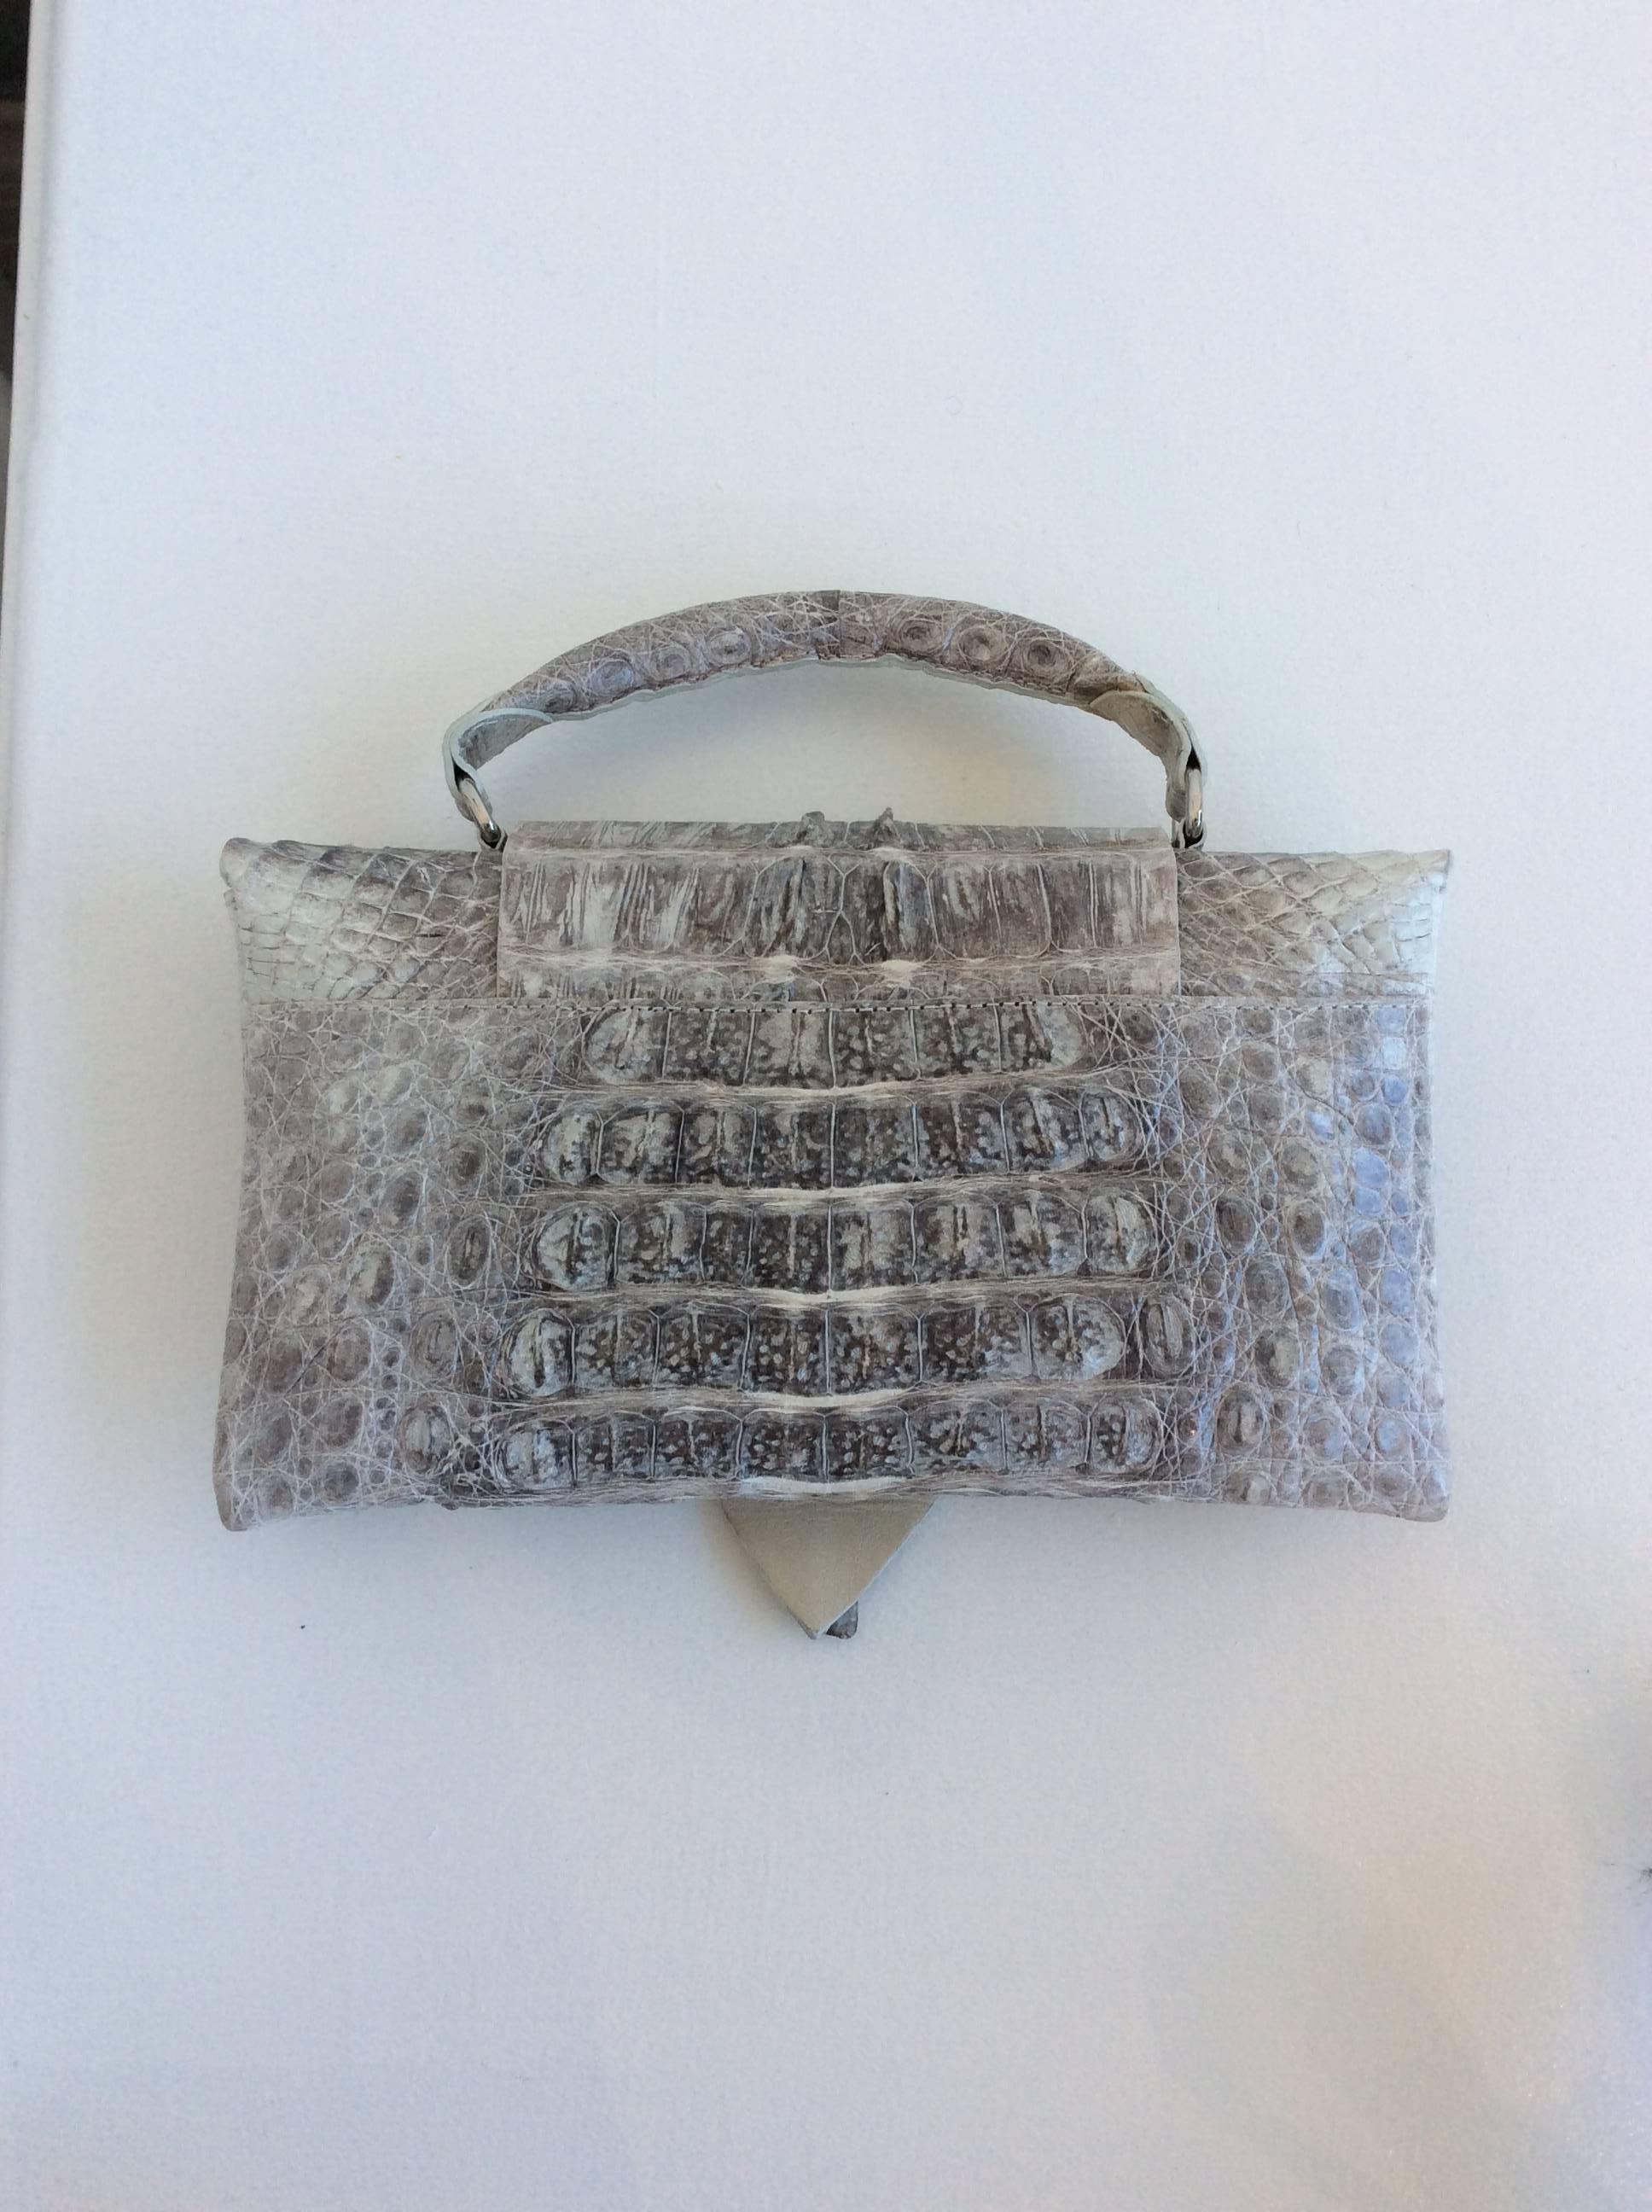 Genuine crocodile gray B. Romanek Rockstar clutch bag. Beige suede interior with zippered pouch at interior wall. Fold over magnetic closure at front. Crocodile drop handle at top. Estimated retail $2,195. Due to restrictions, this item cannot be